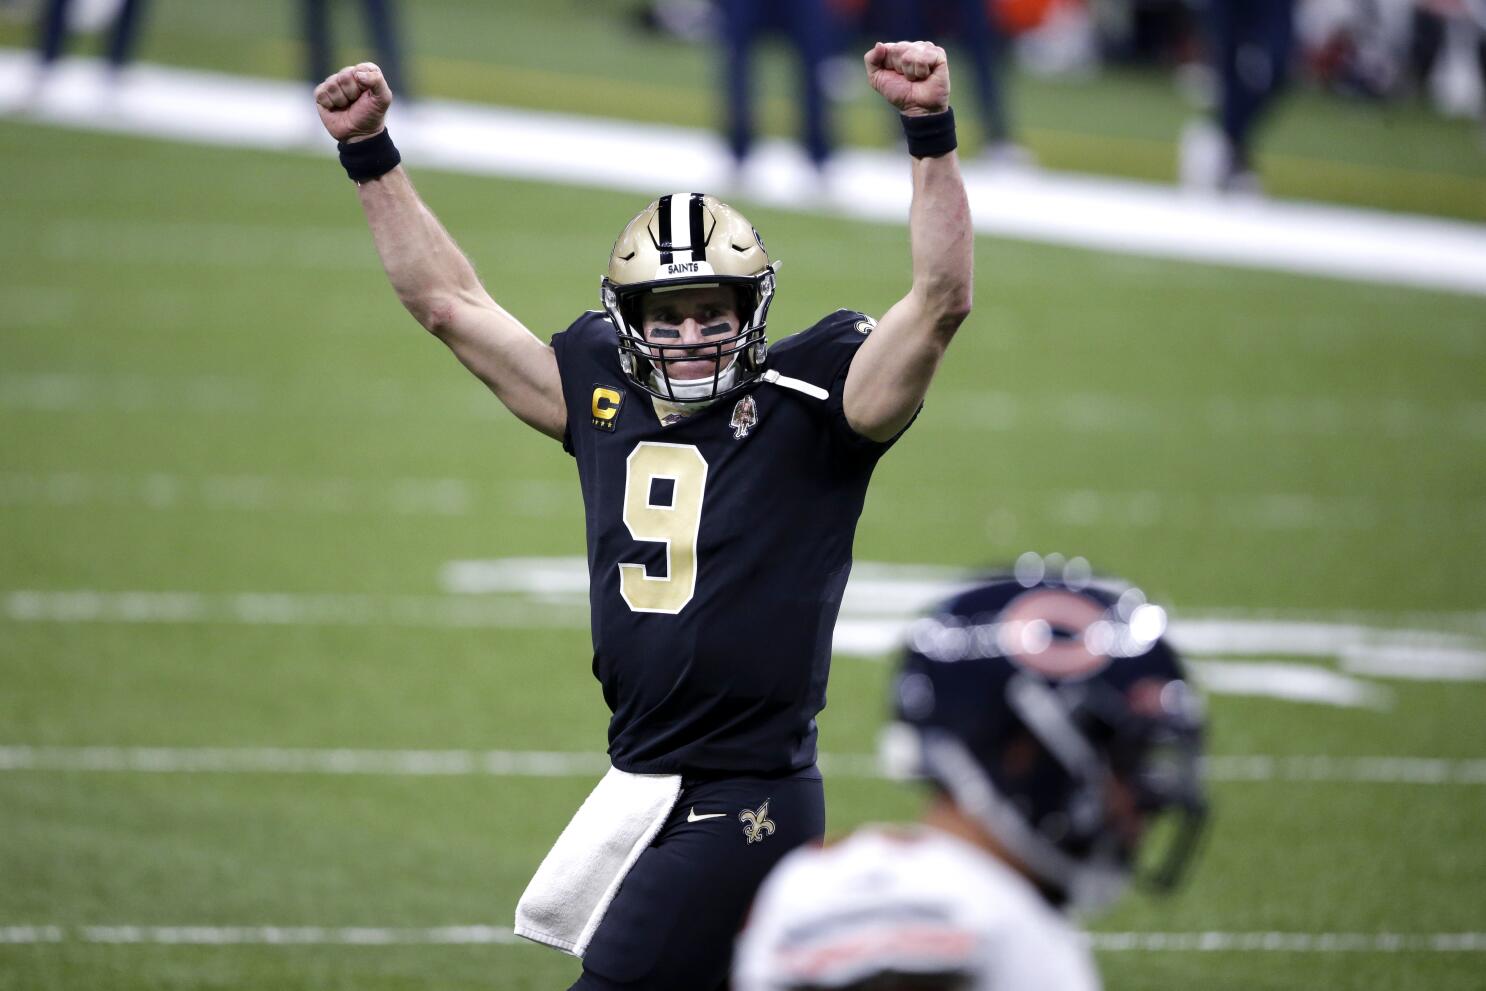 NFL playoffs: Drew Brees powers Saints to win over Bears - Los Angeles Times